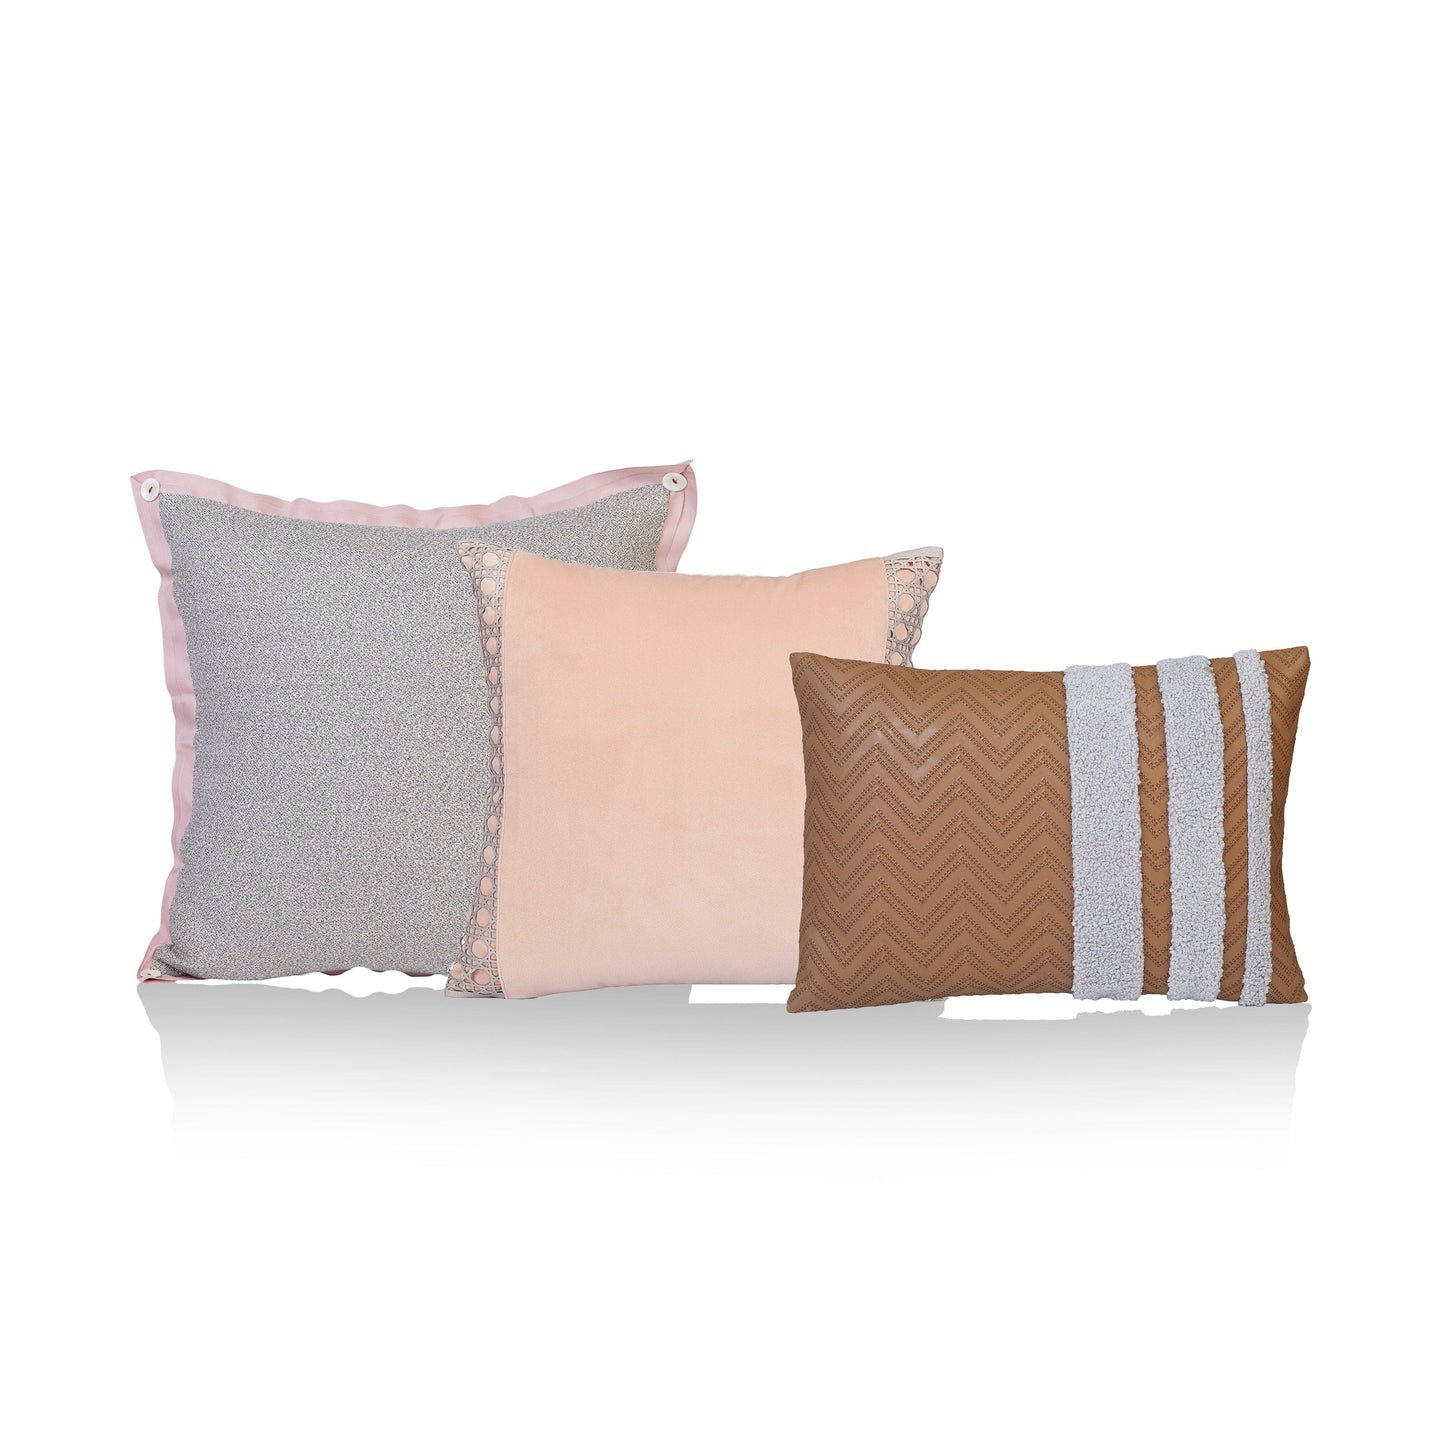 Cormac Cushion Cover Set of 3